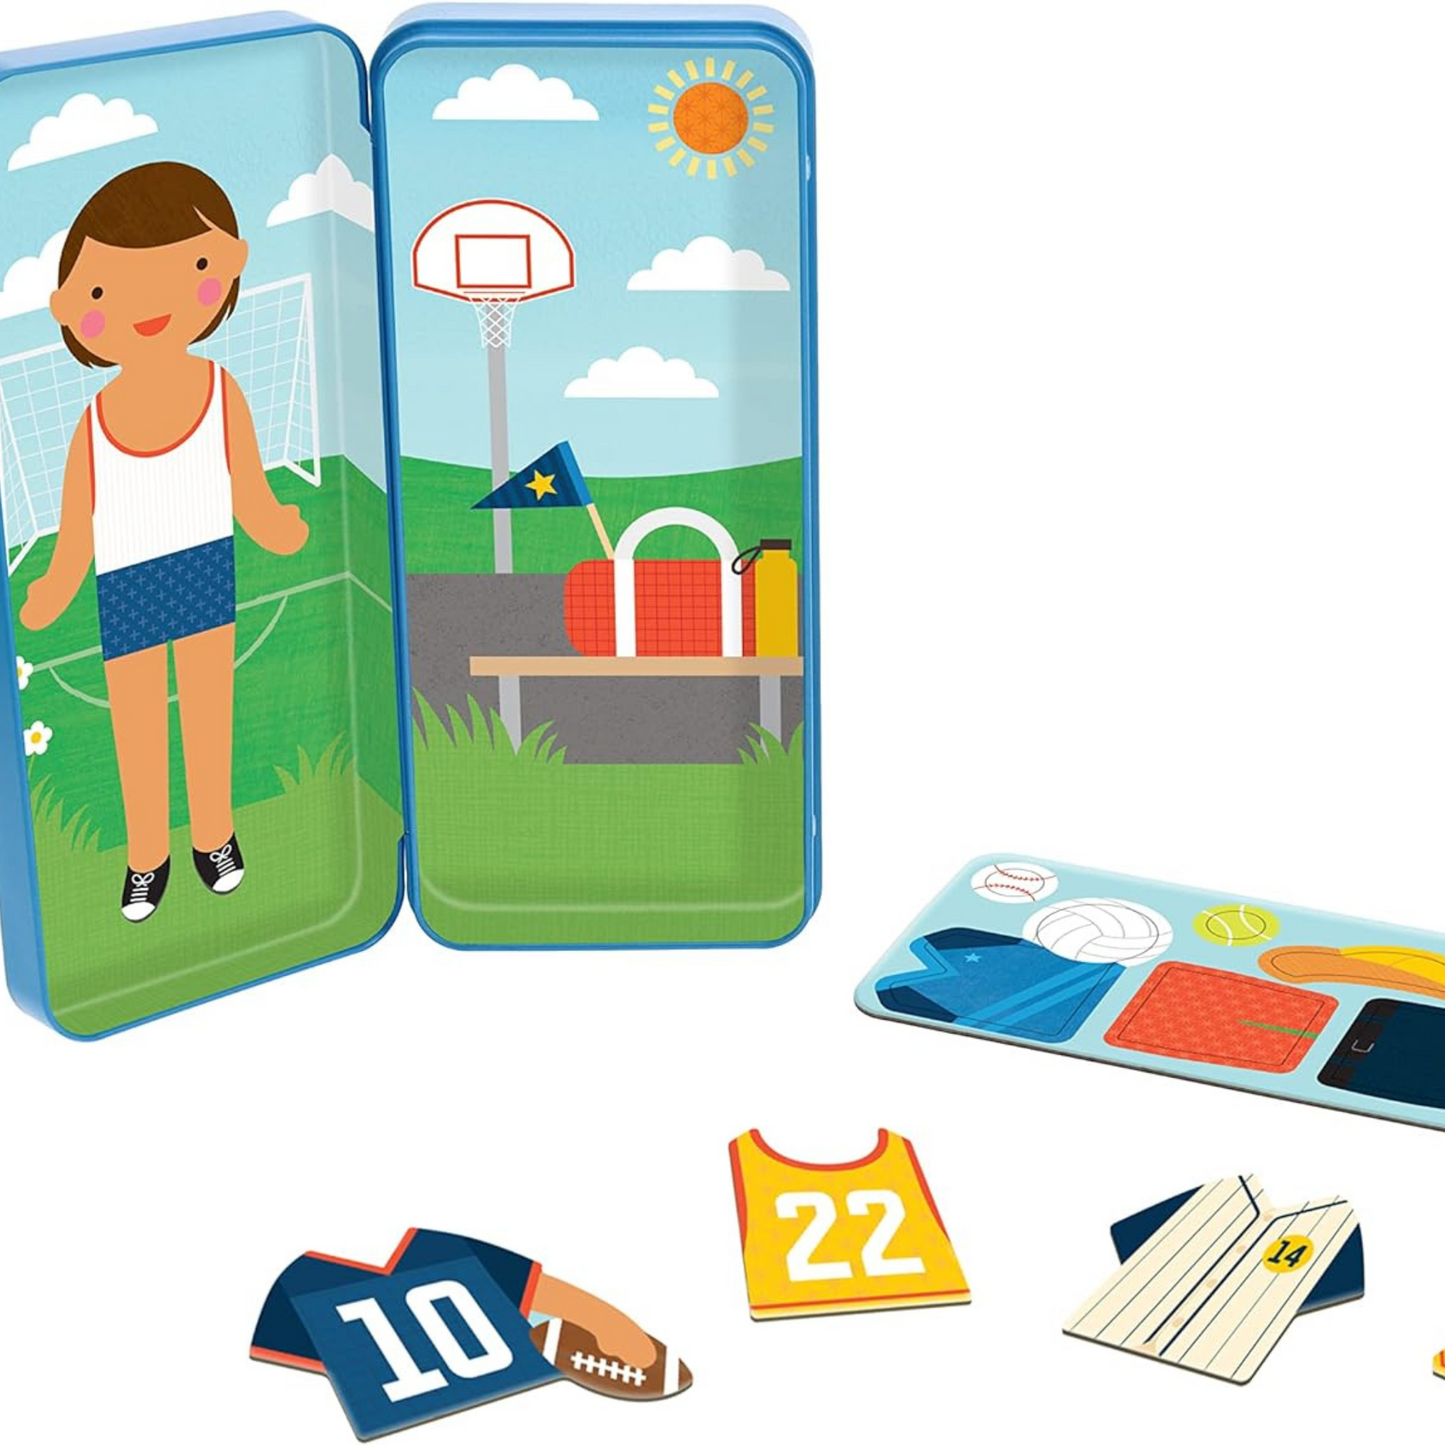 Shine Bright Magnetic Dress Up Sports Star